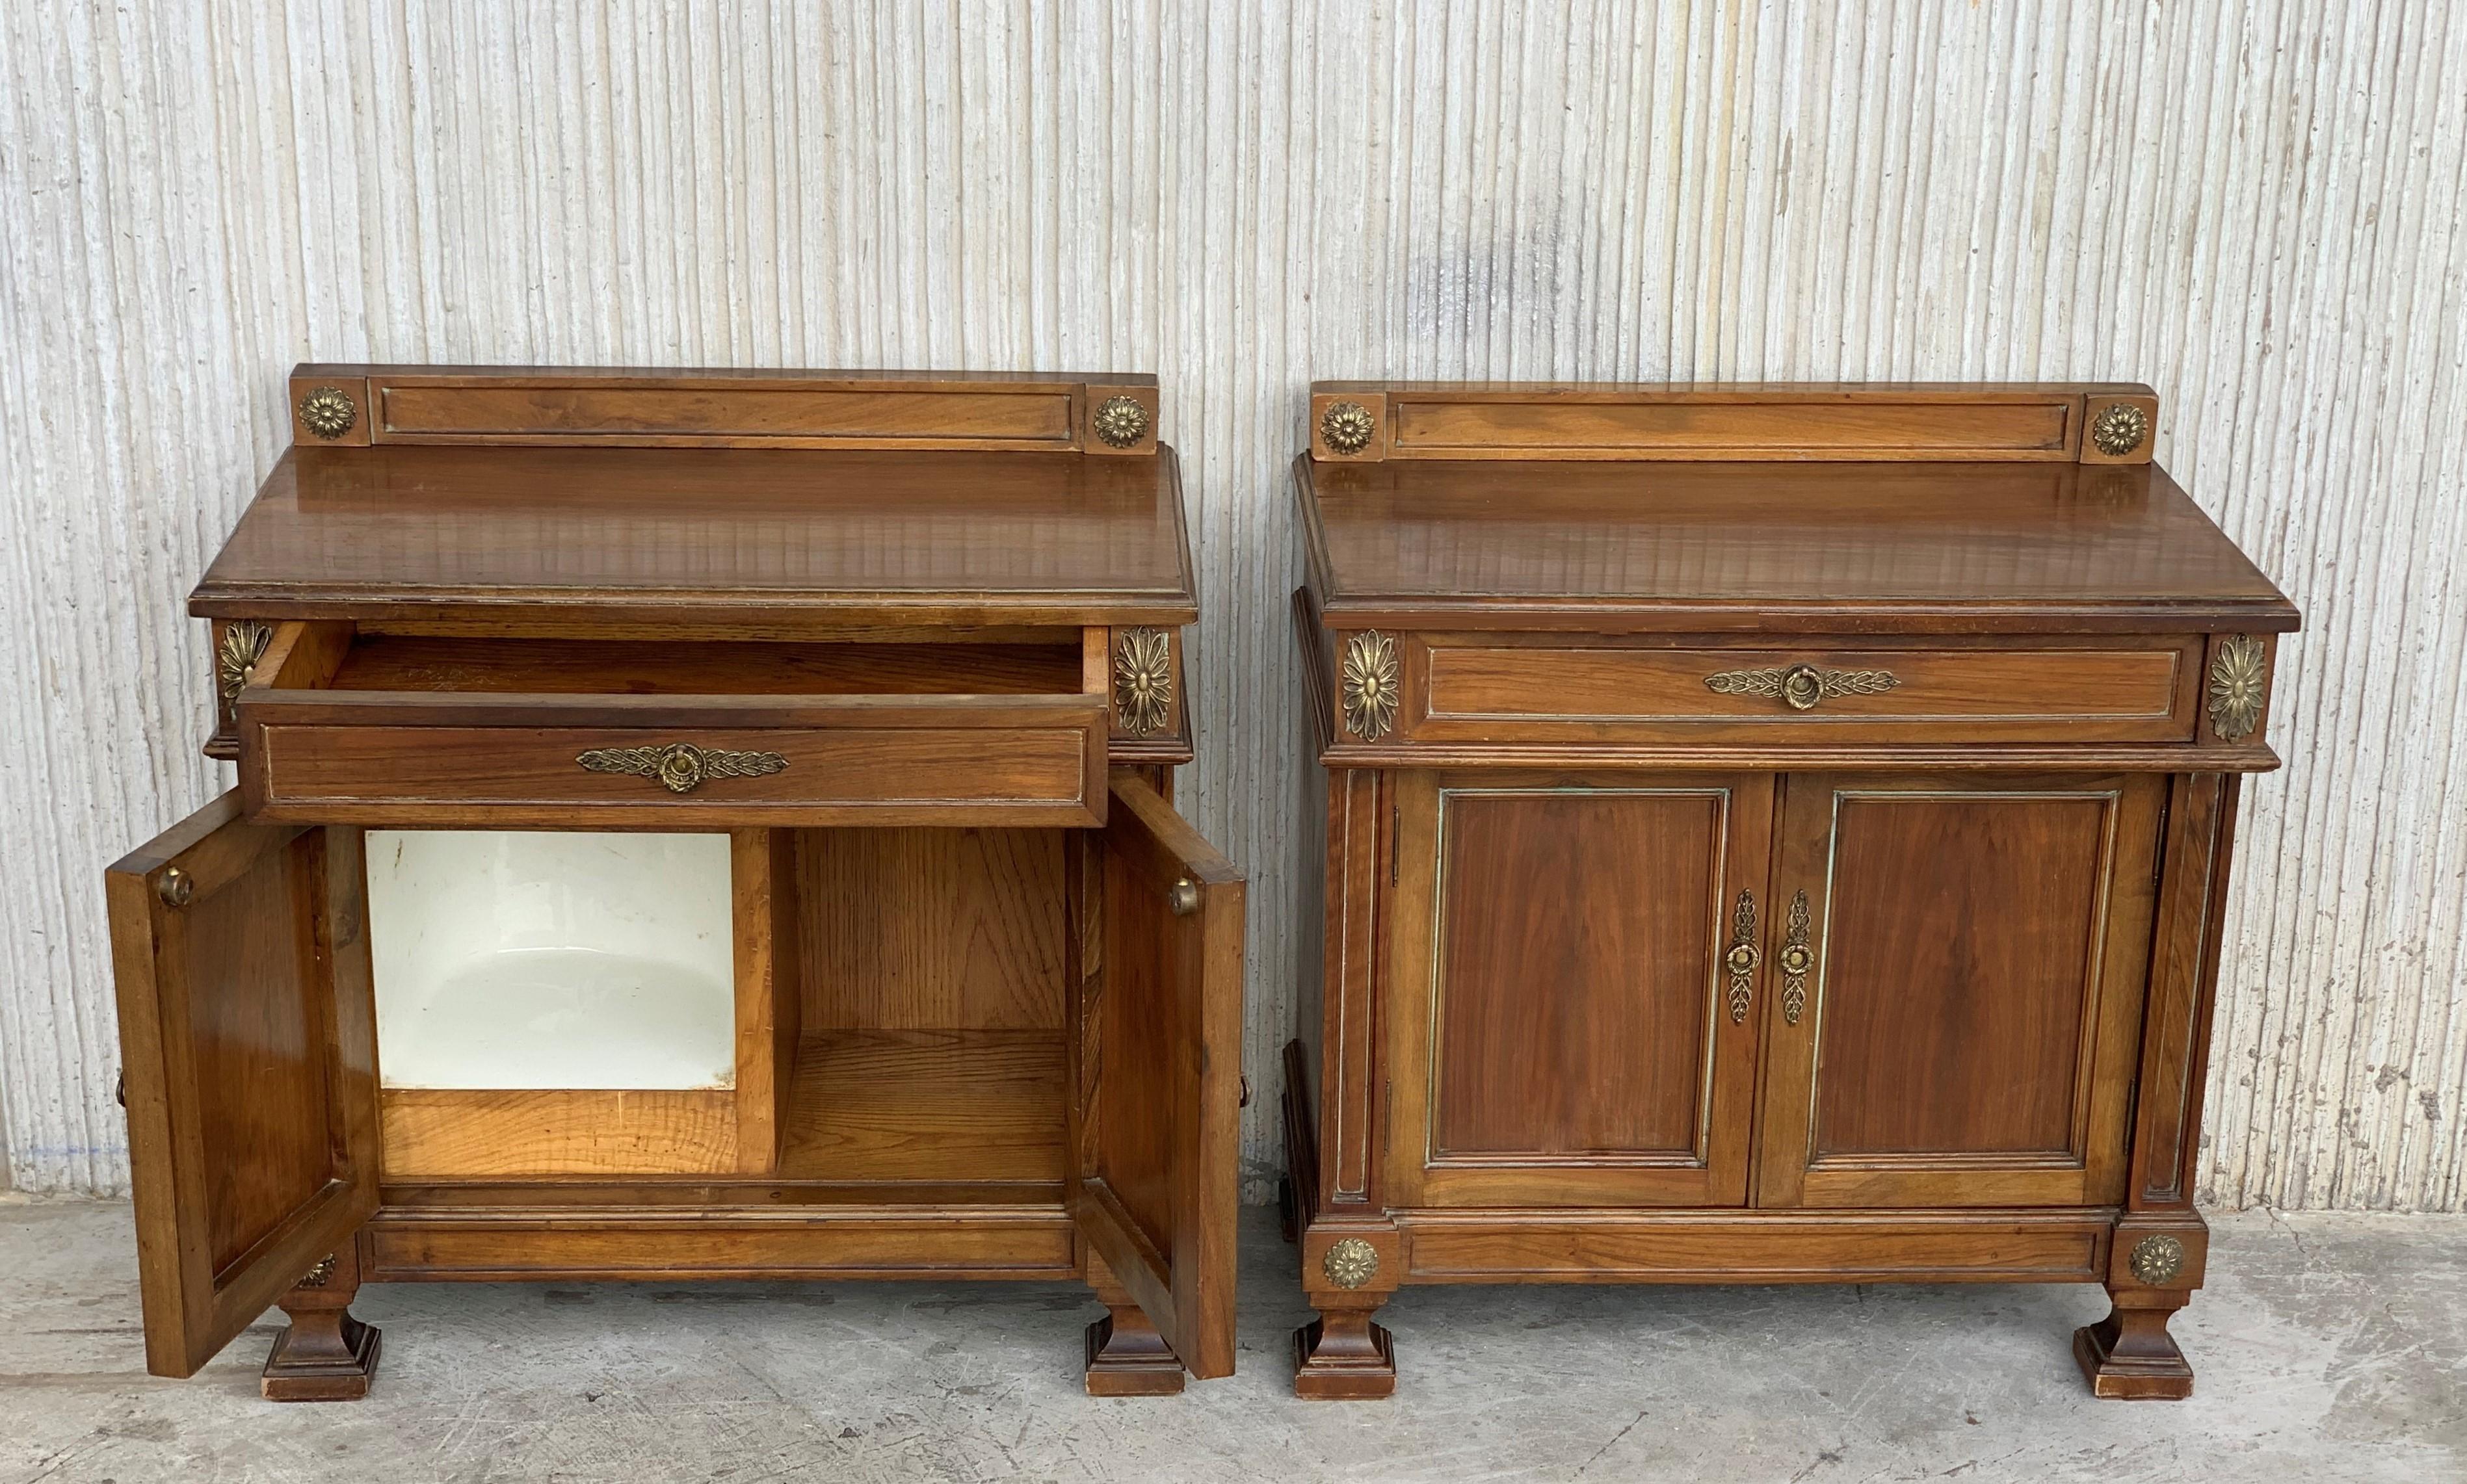 20th Century Pair of French Bedside Tables Nightstands with Crest and Bronze Details